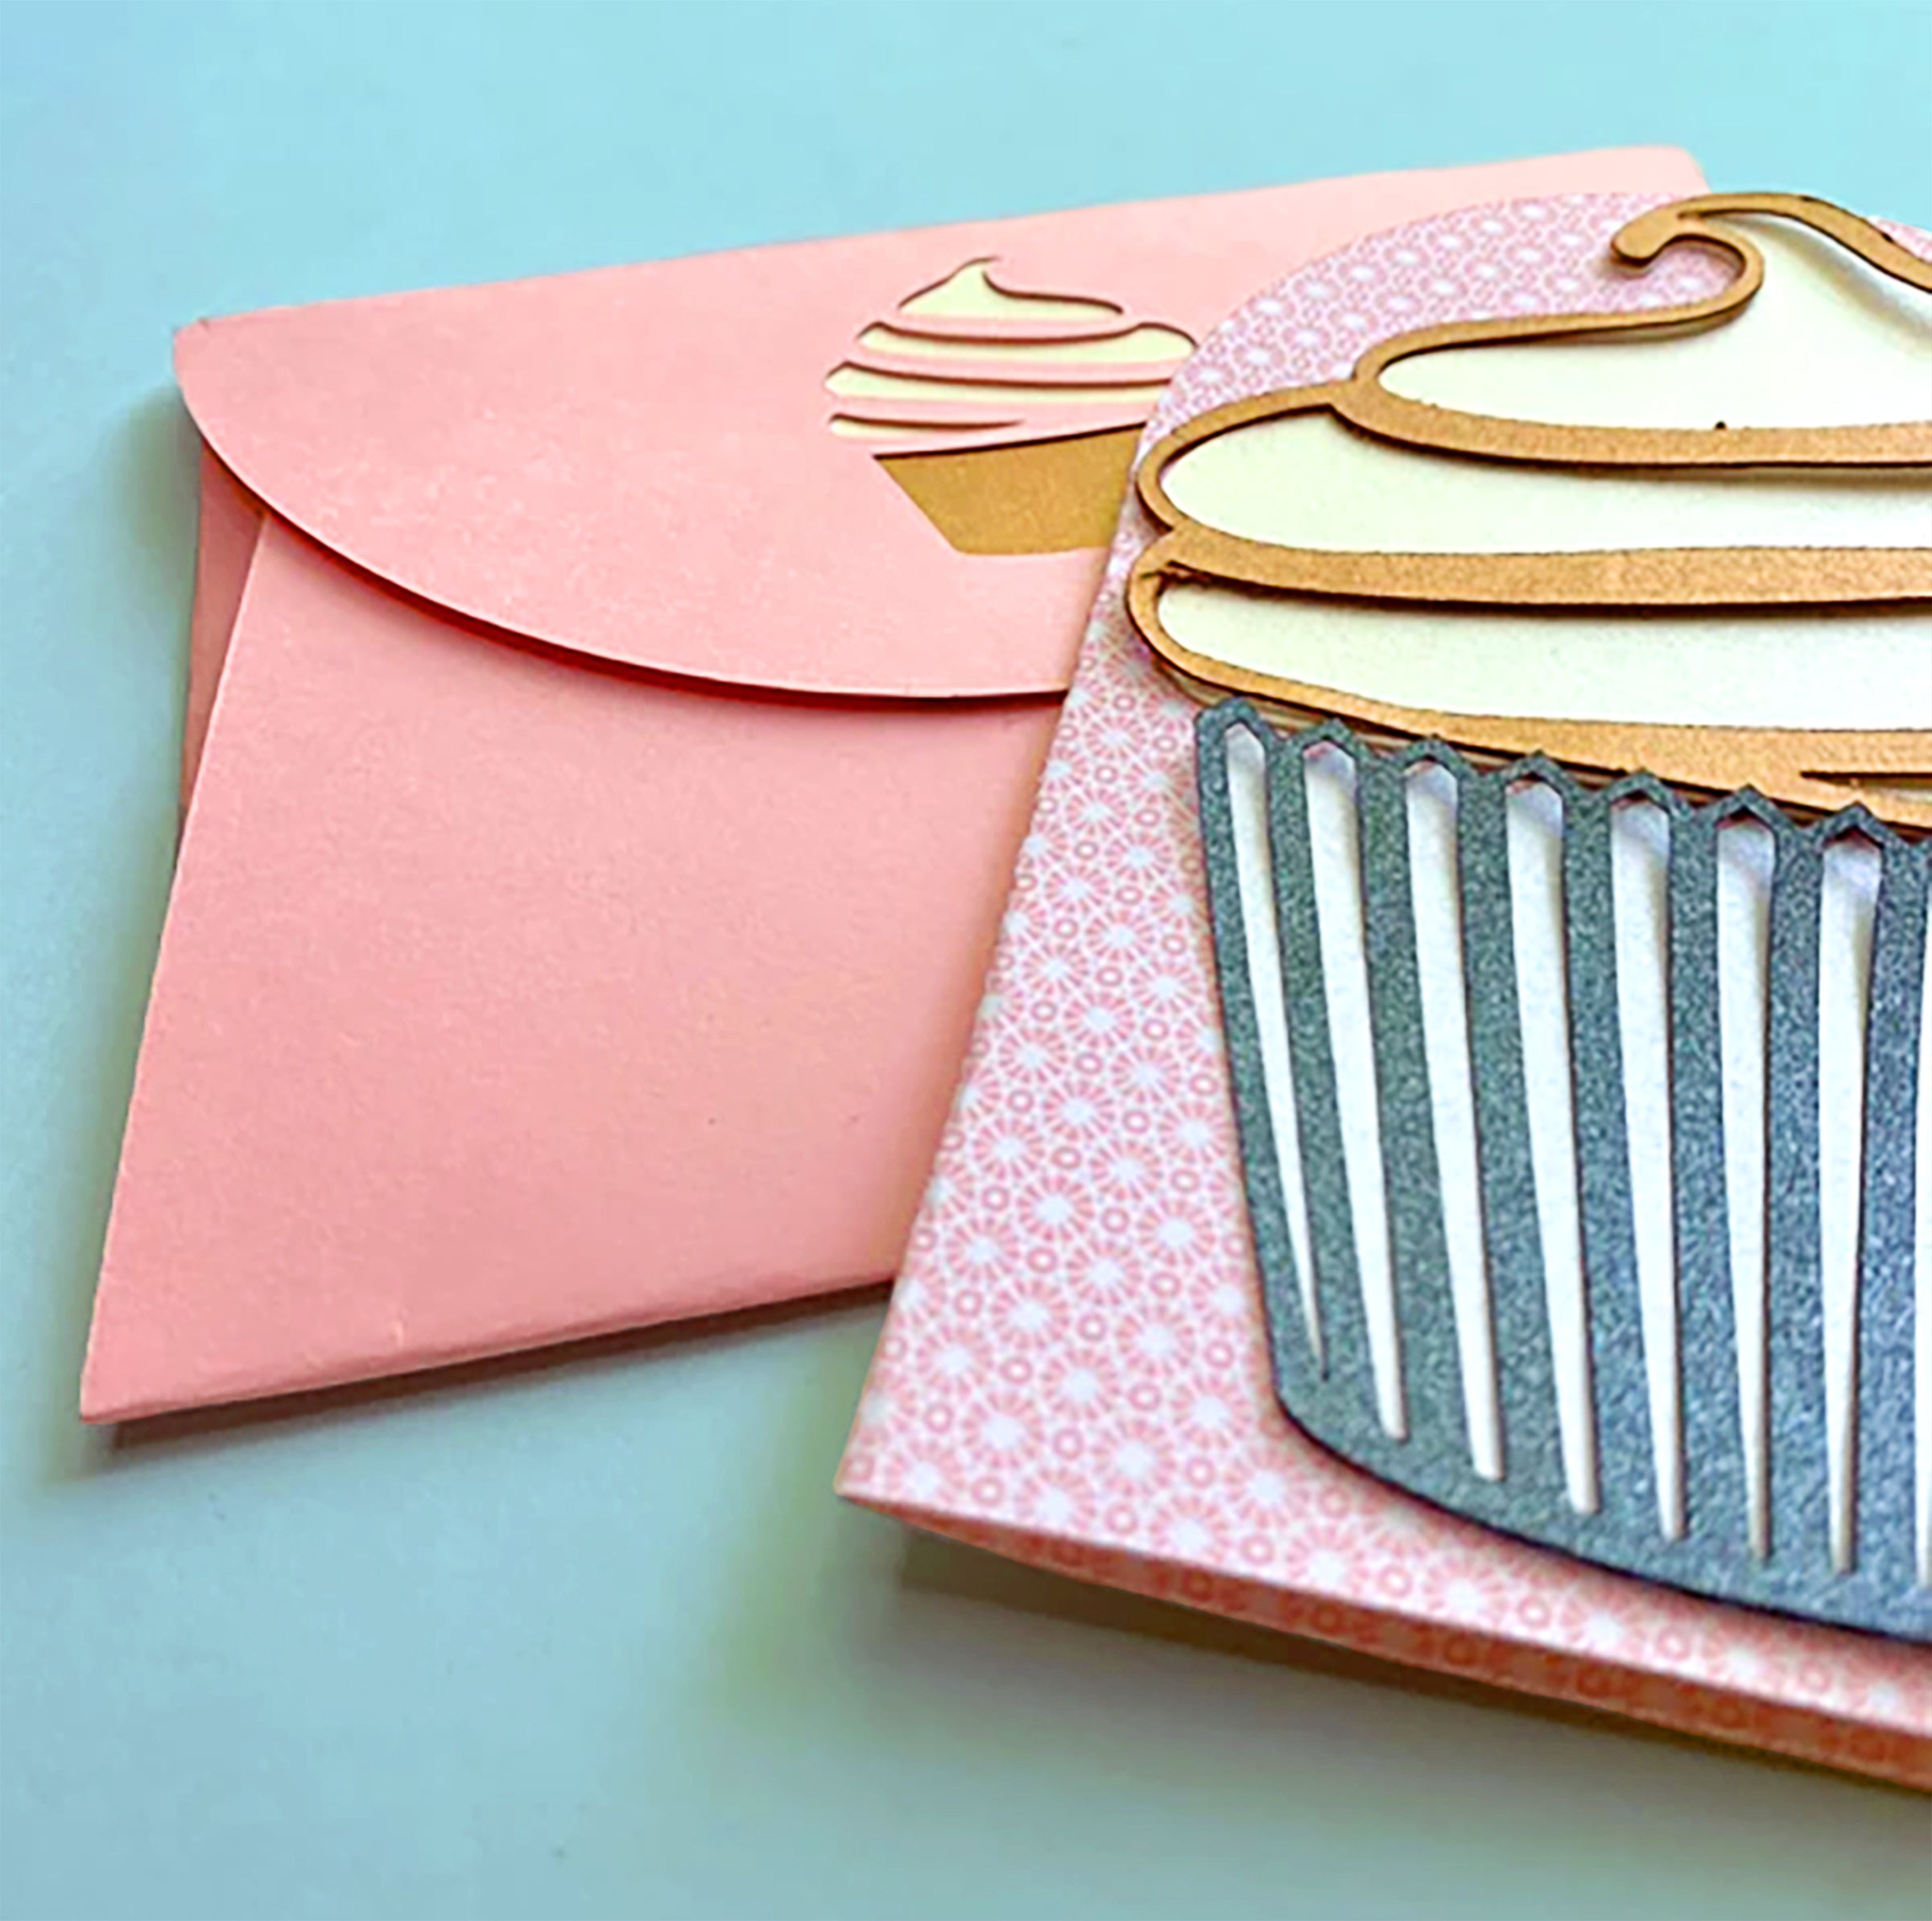 Cardstock vs Construction Paper: Which Should You Choose